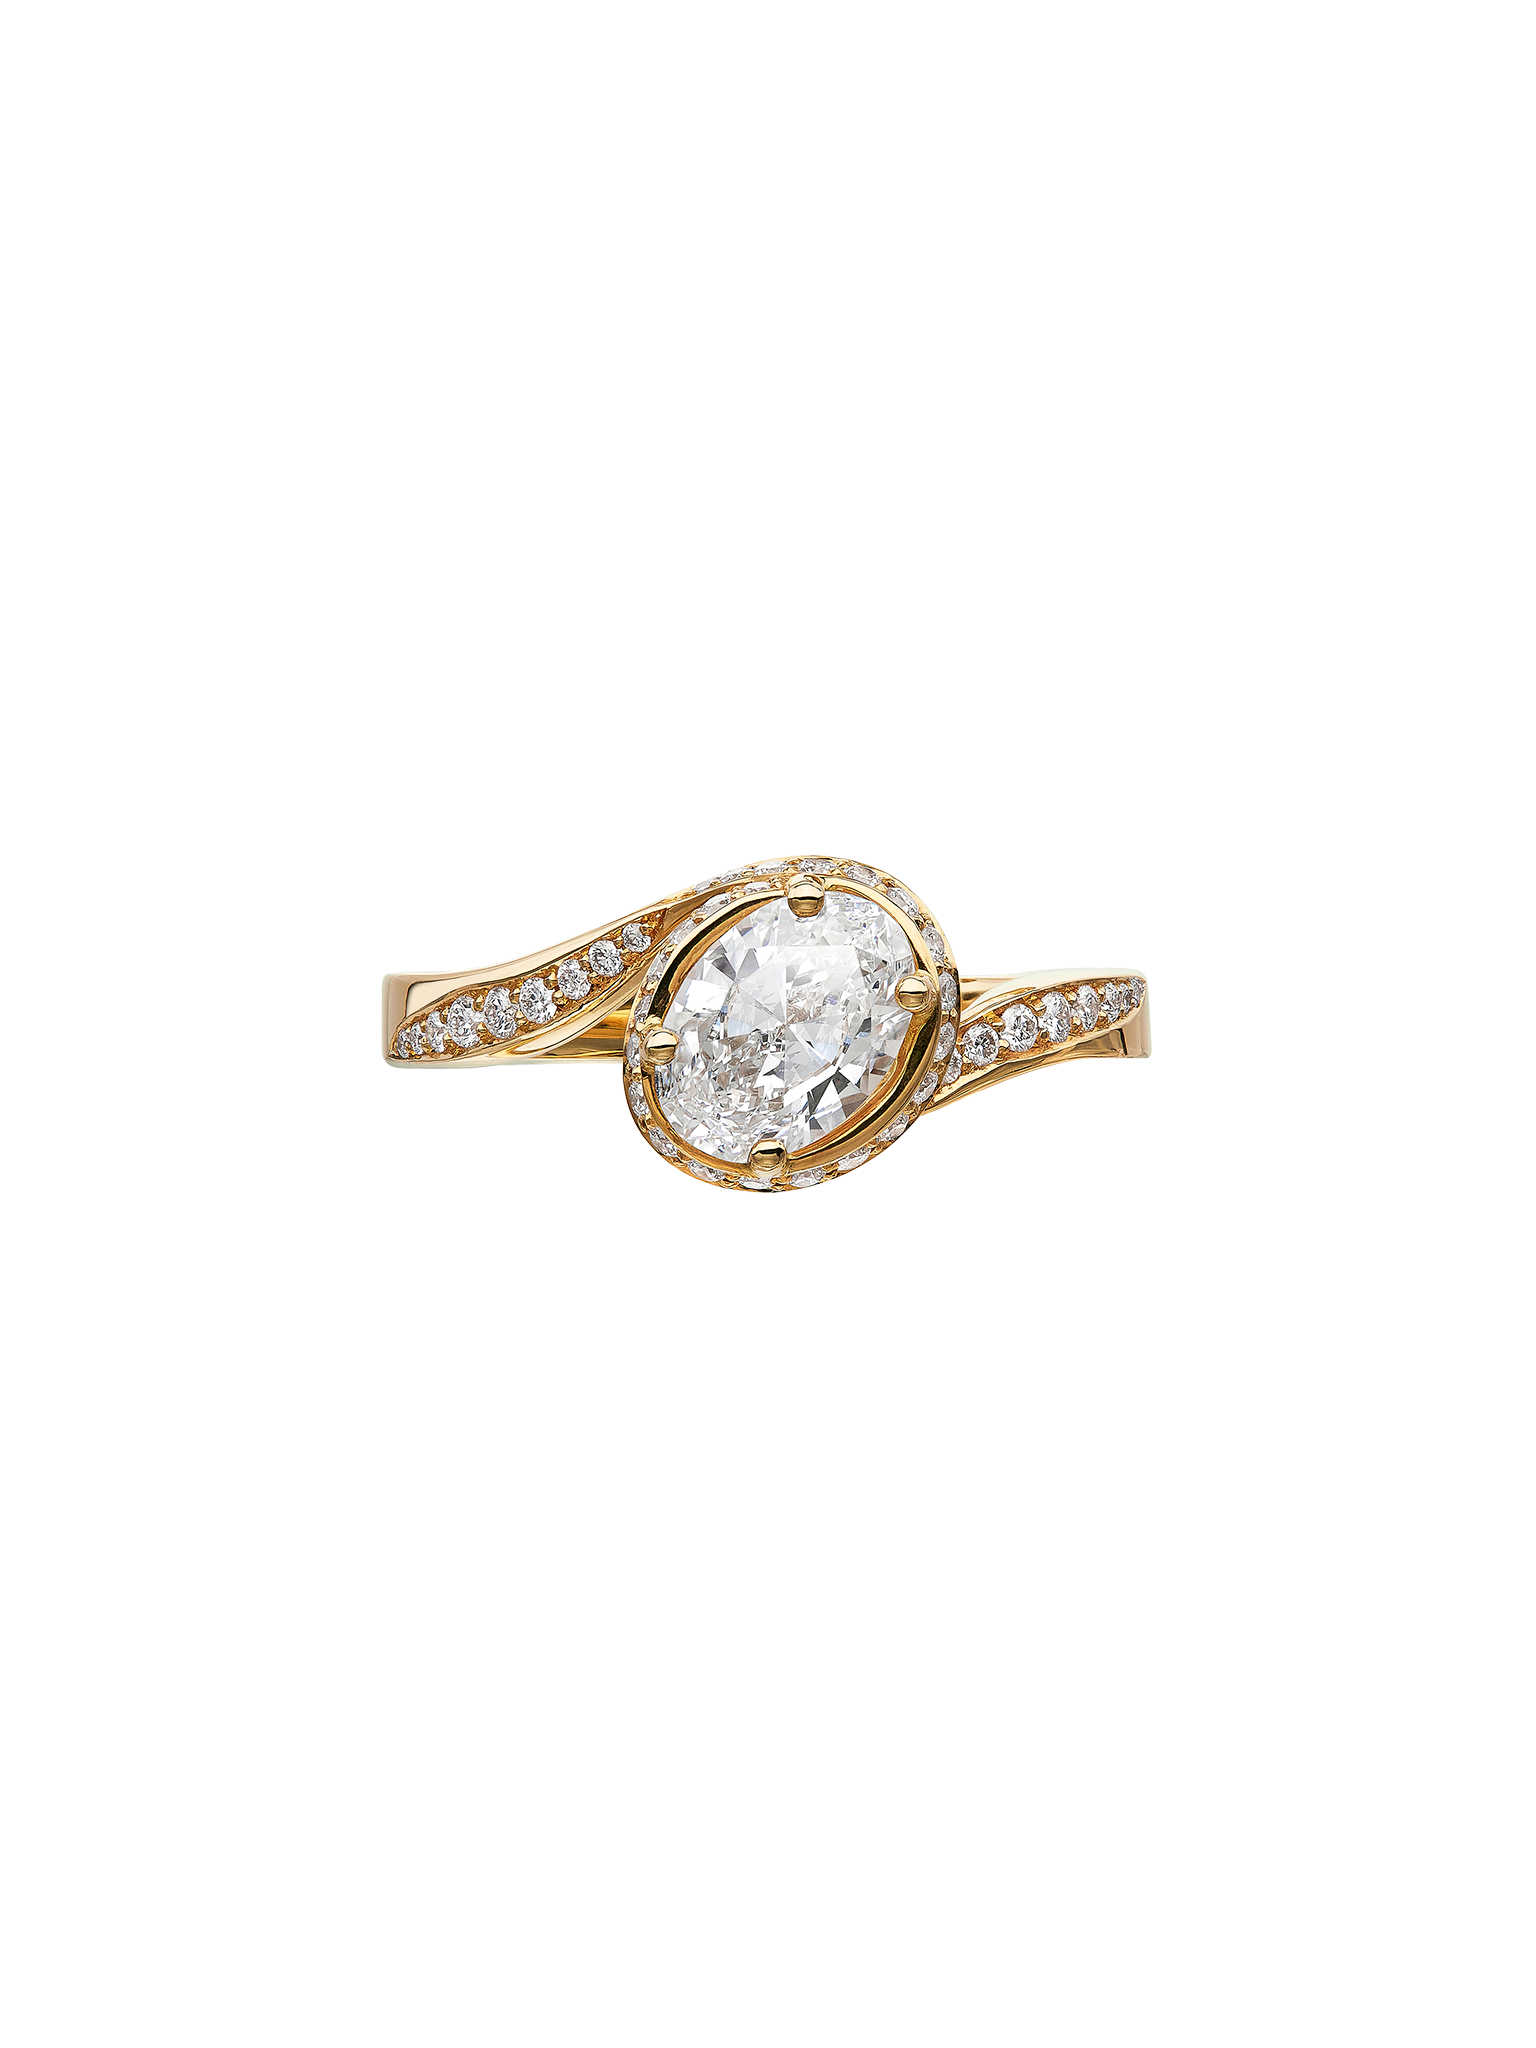 Itasca solitaire engagement ring